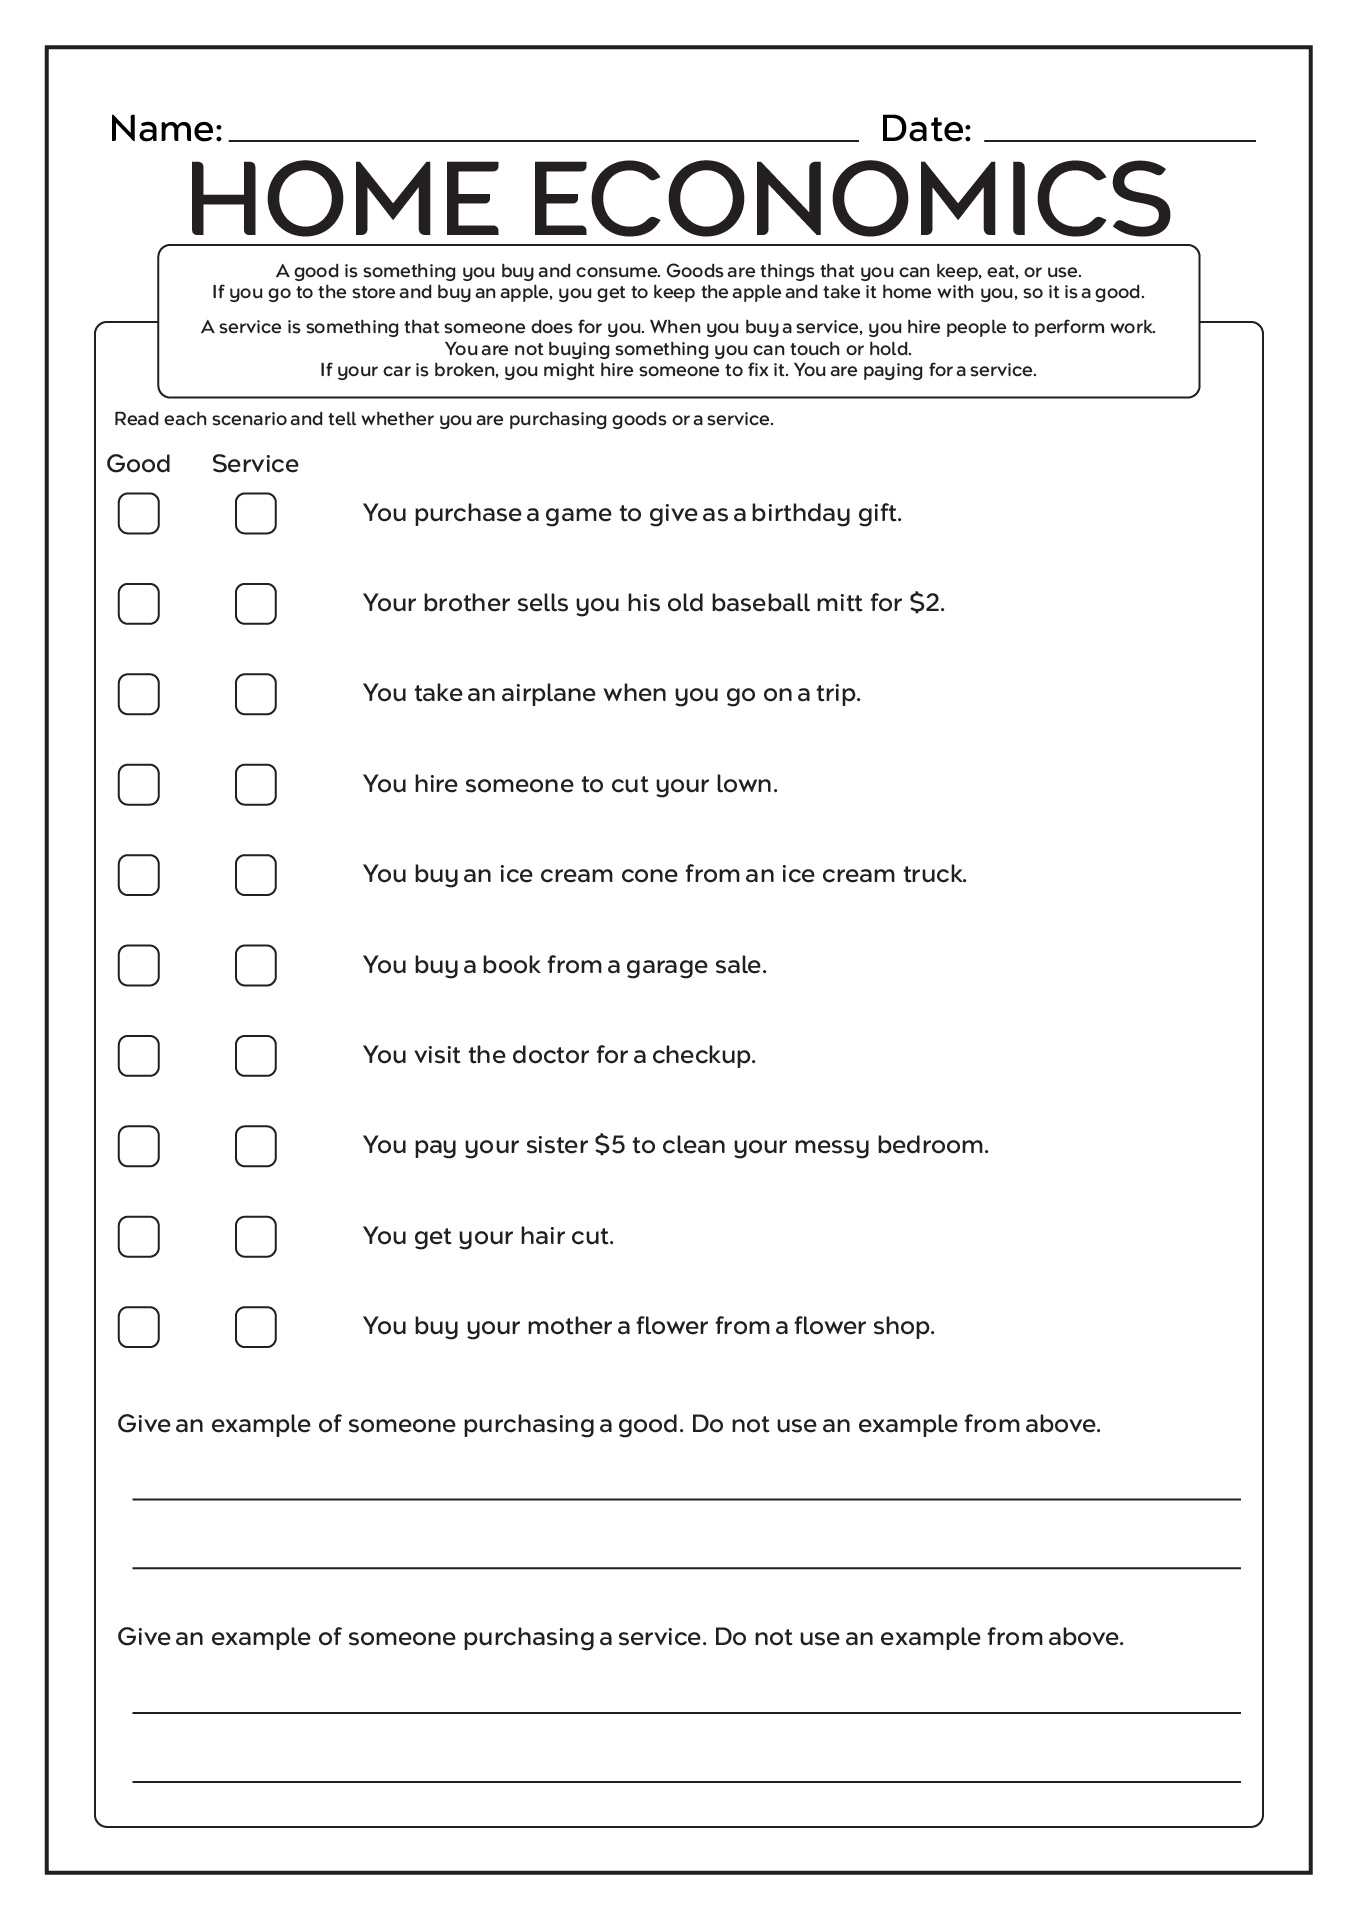 13 Best Images of Economics Activity Worksheets Supply and Demand